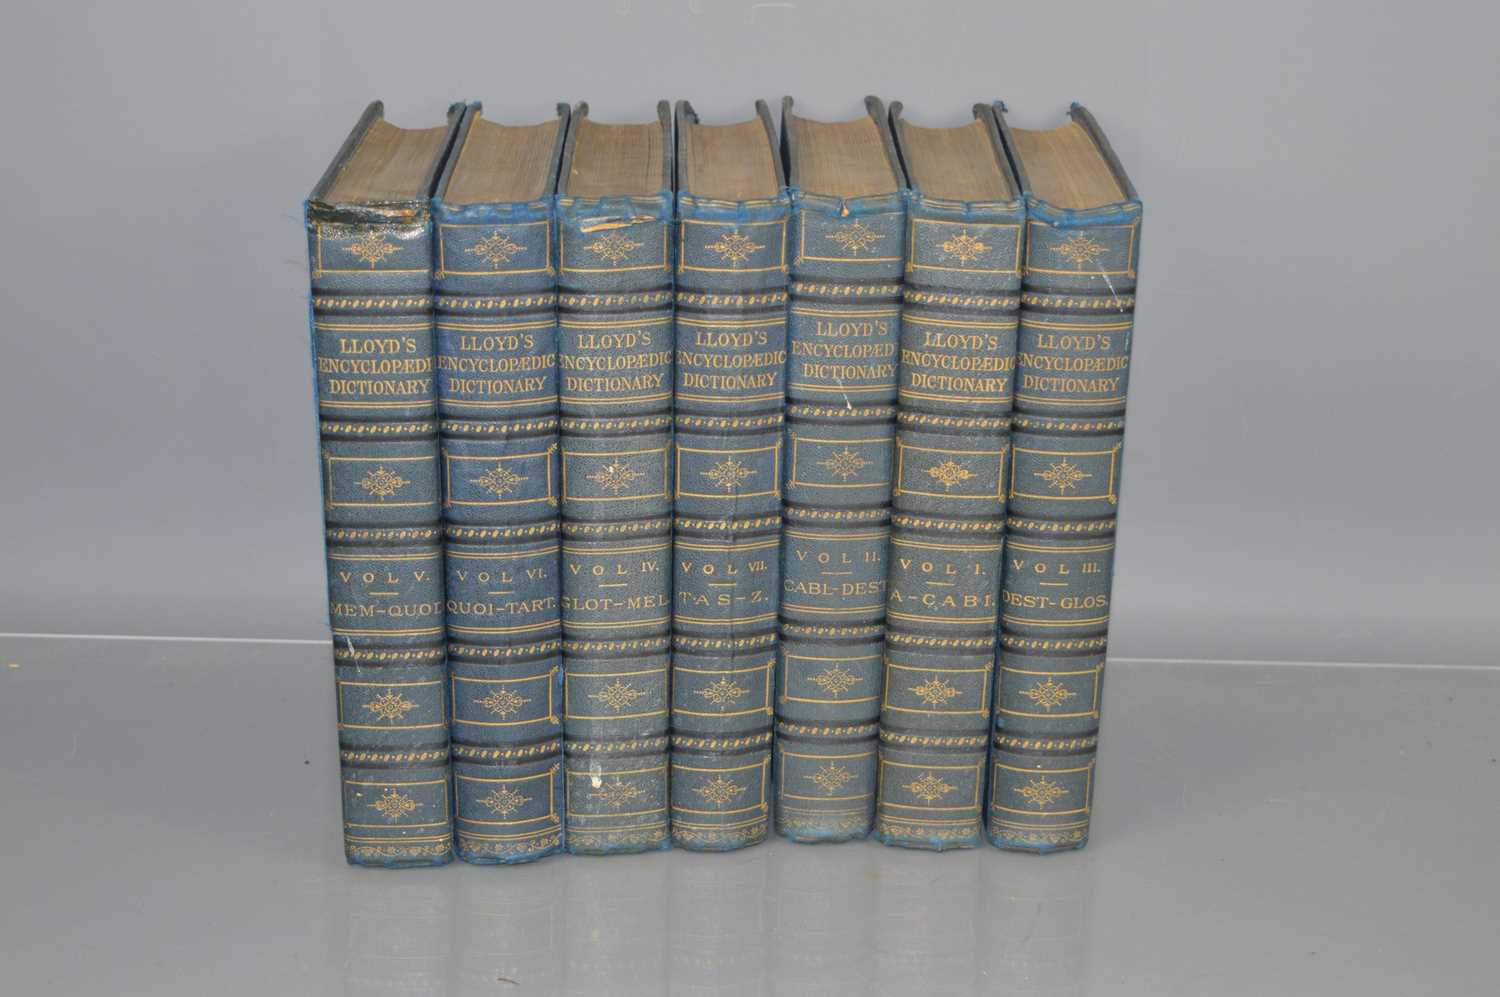 Lloyds, Encyclopaedic dictionary, seven volumes, published 1895